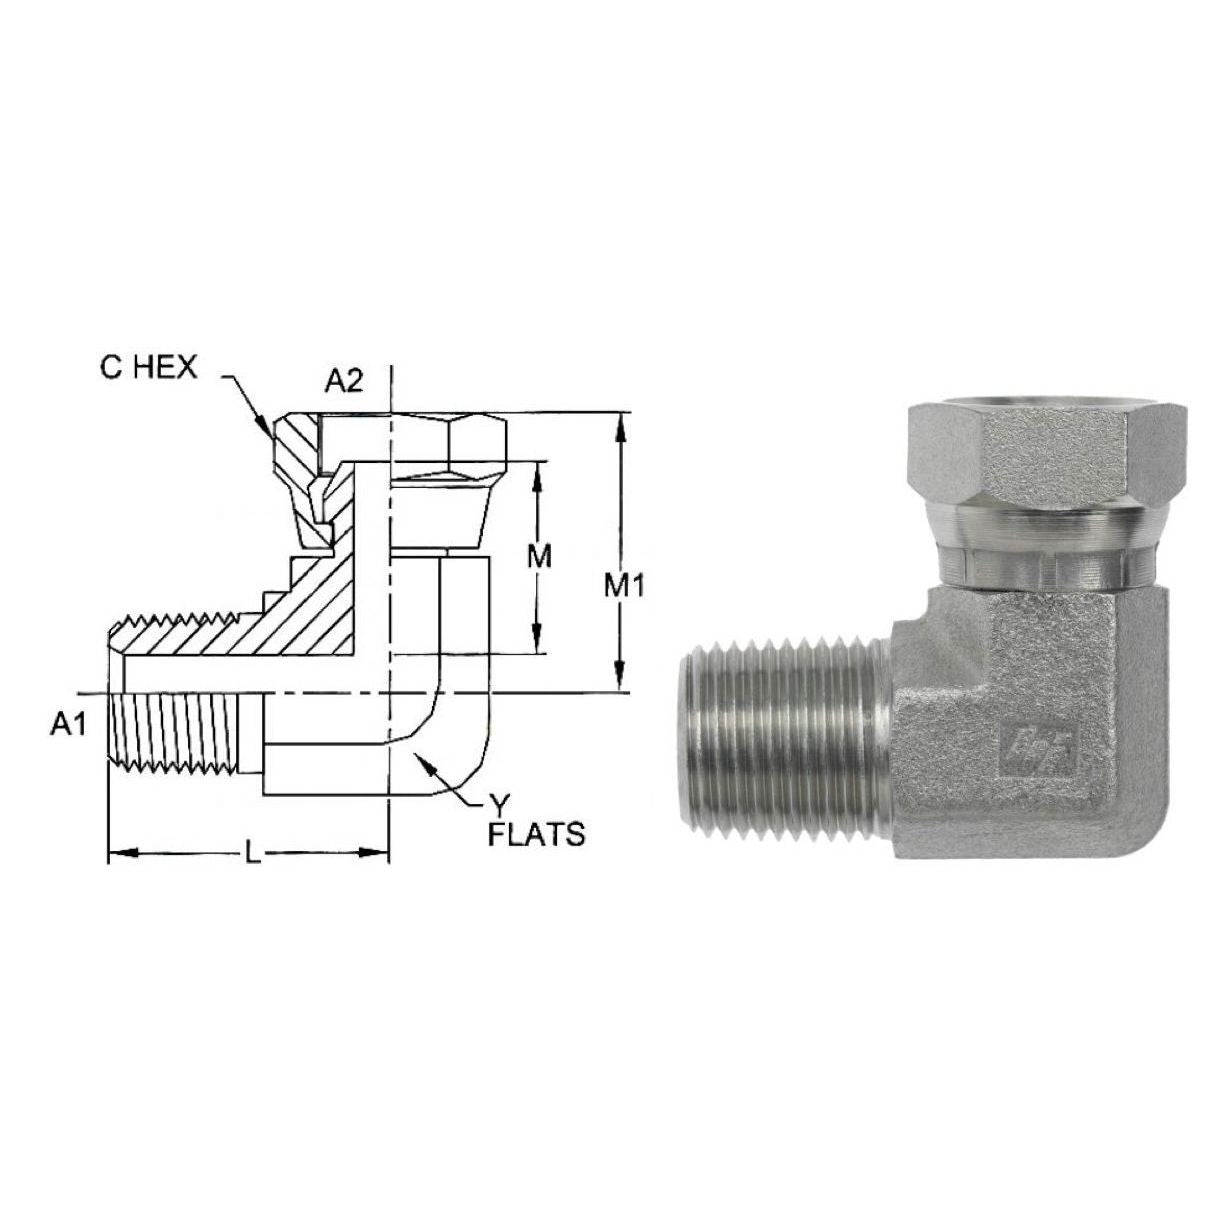 1501-08-08-SS : OneHydraulics 90-Degree Elbow, 0.5 (1/2) Male NPT x 0.5 (1/2) Female NPT Swivel, Stainless Steel, 4200psi